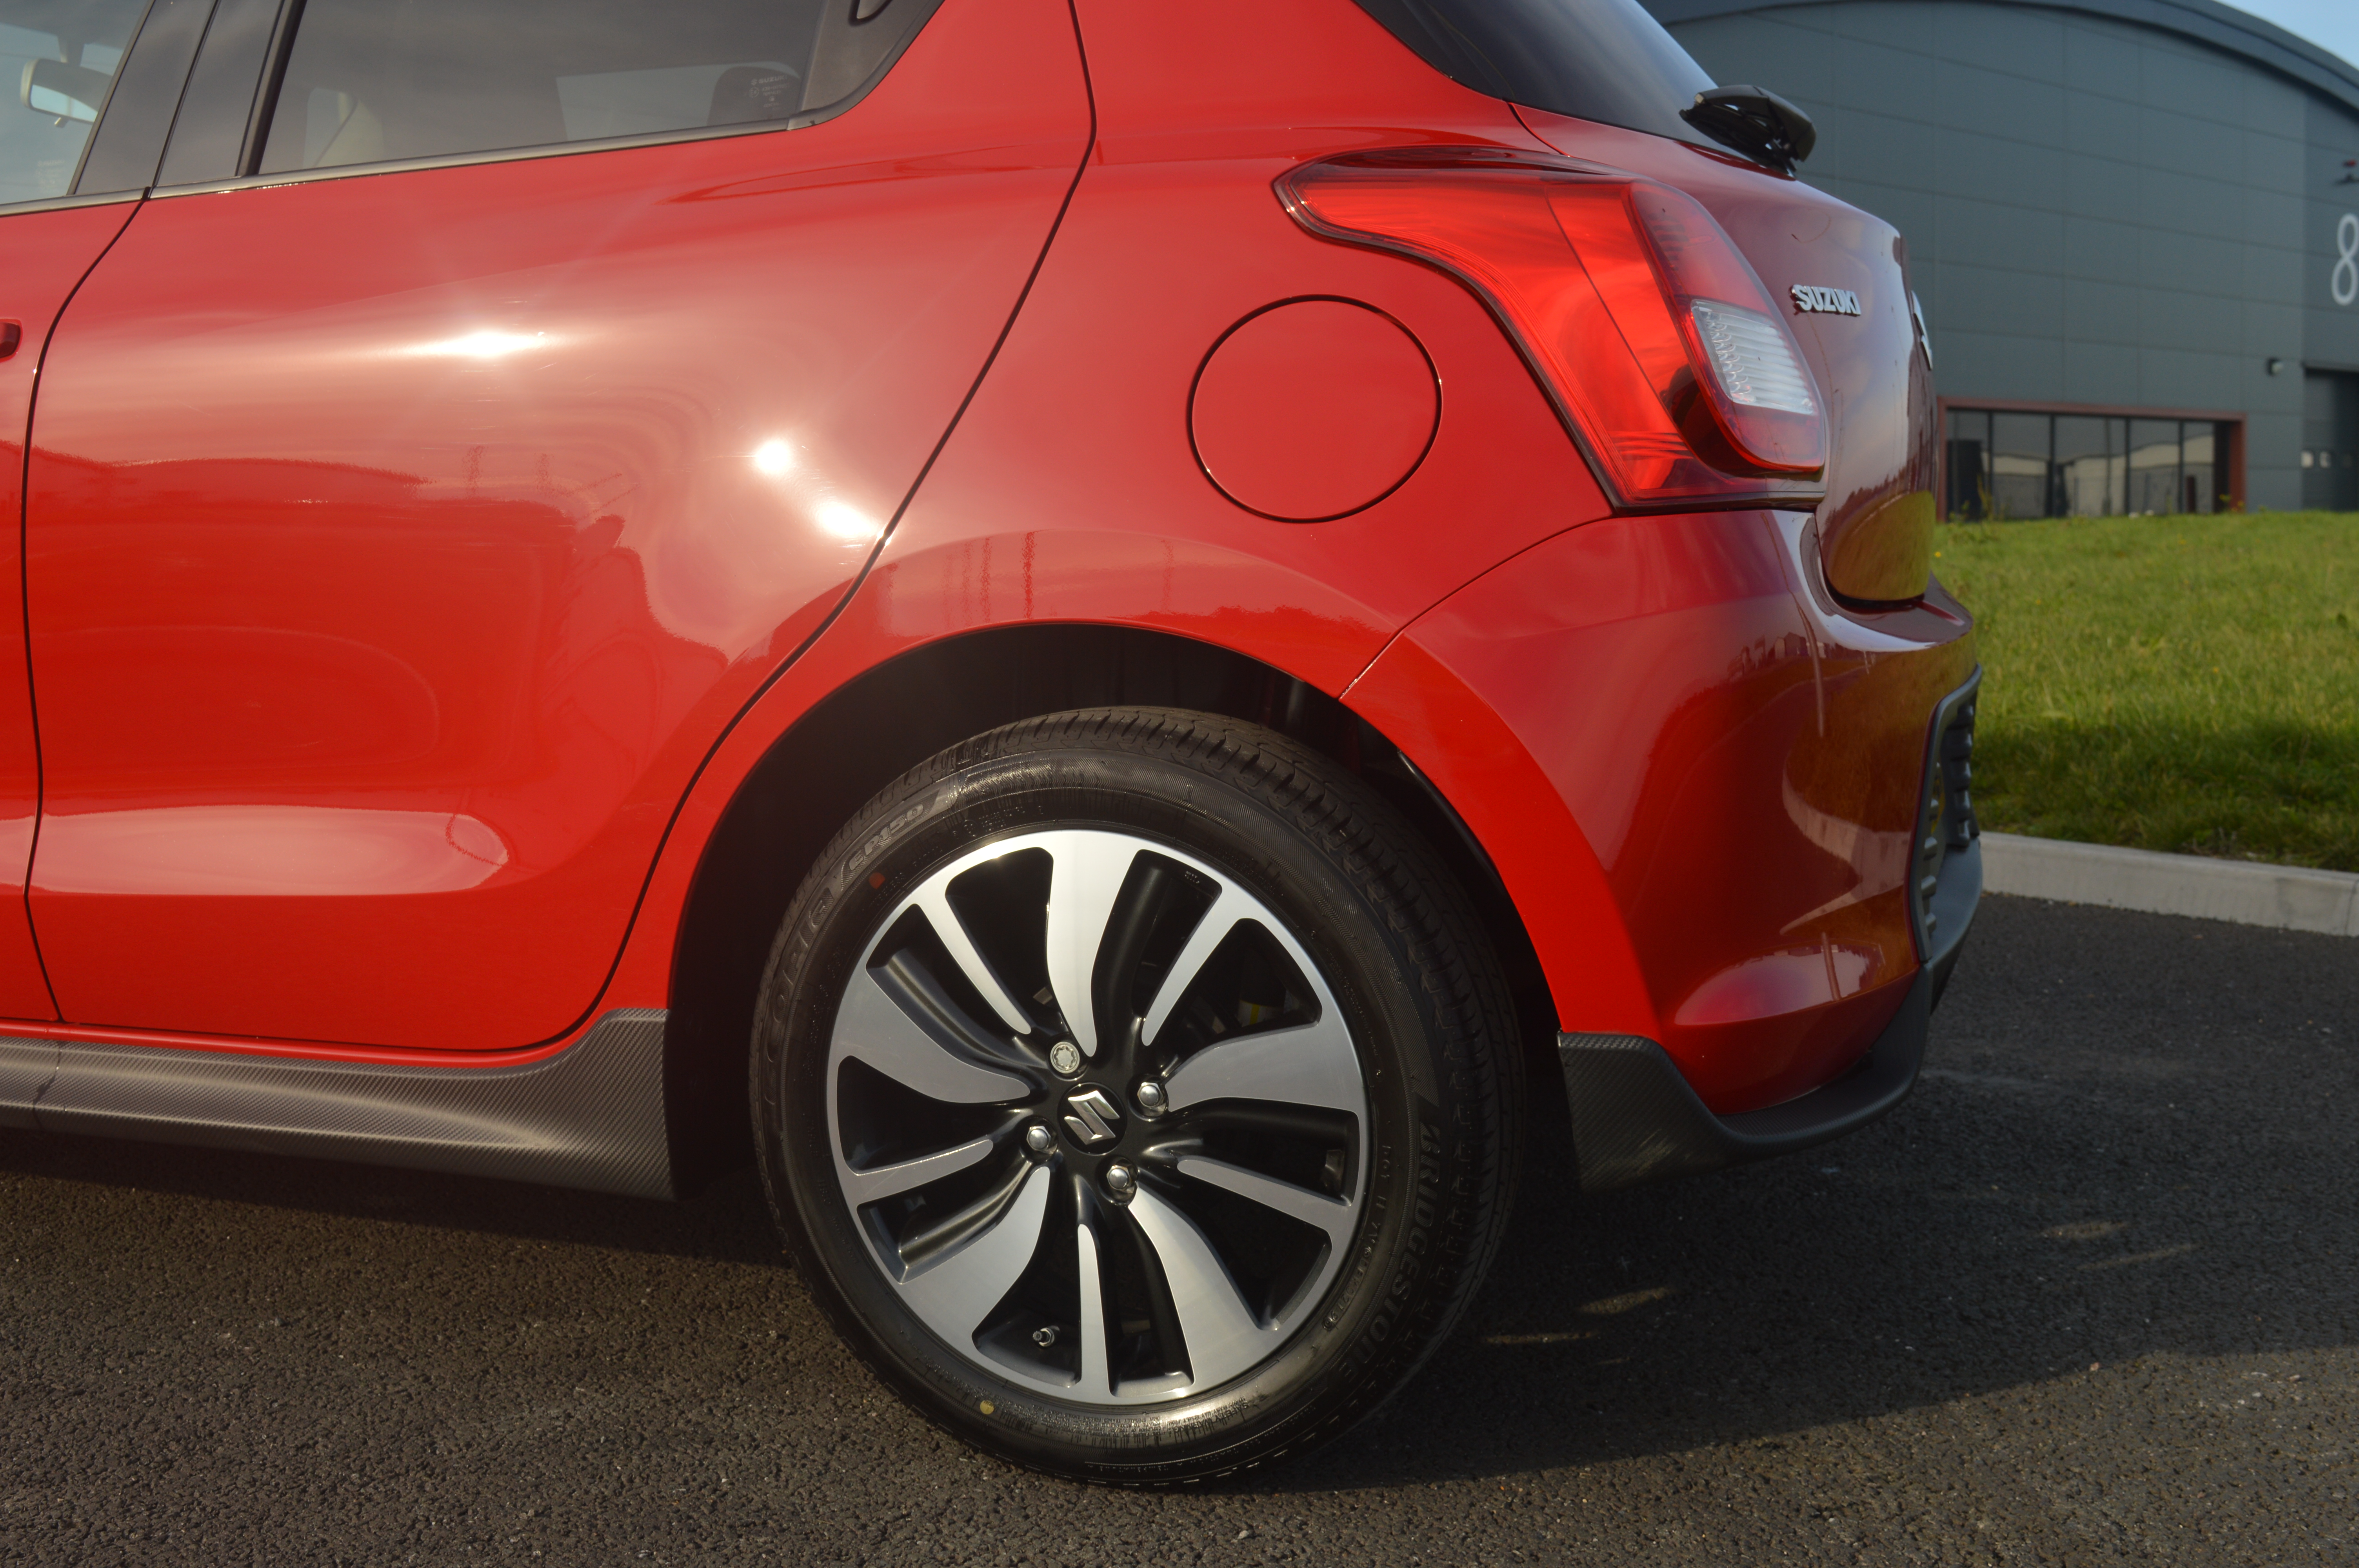 Detailed alloys give the Swift a premium appearance